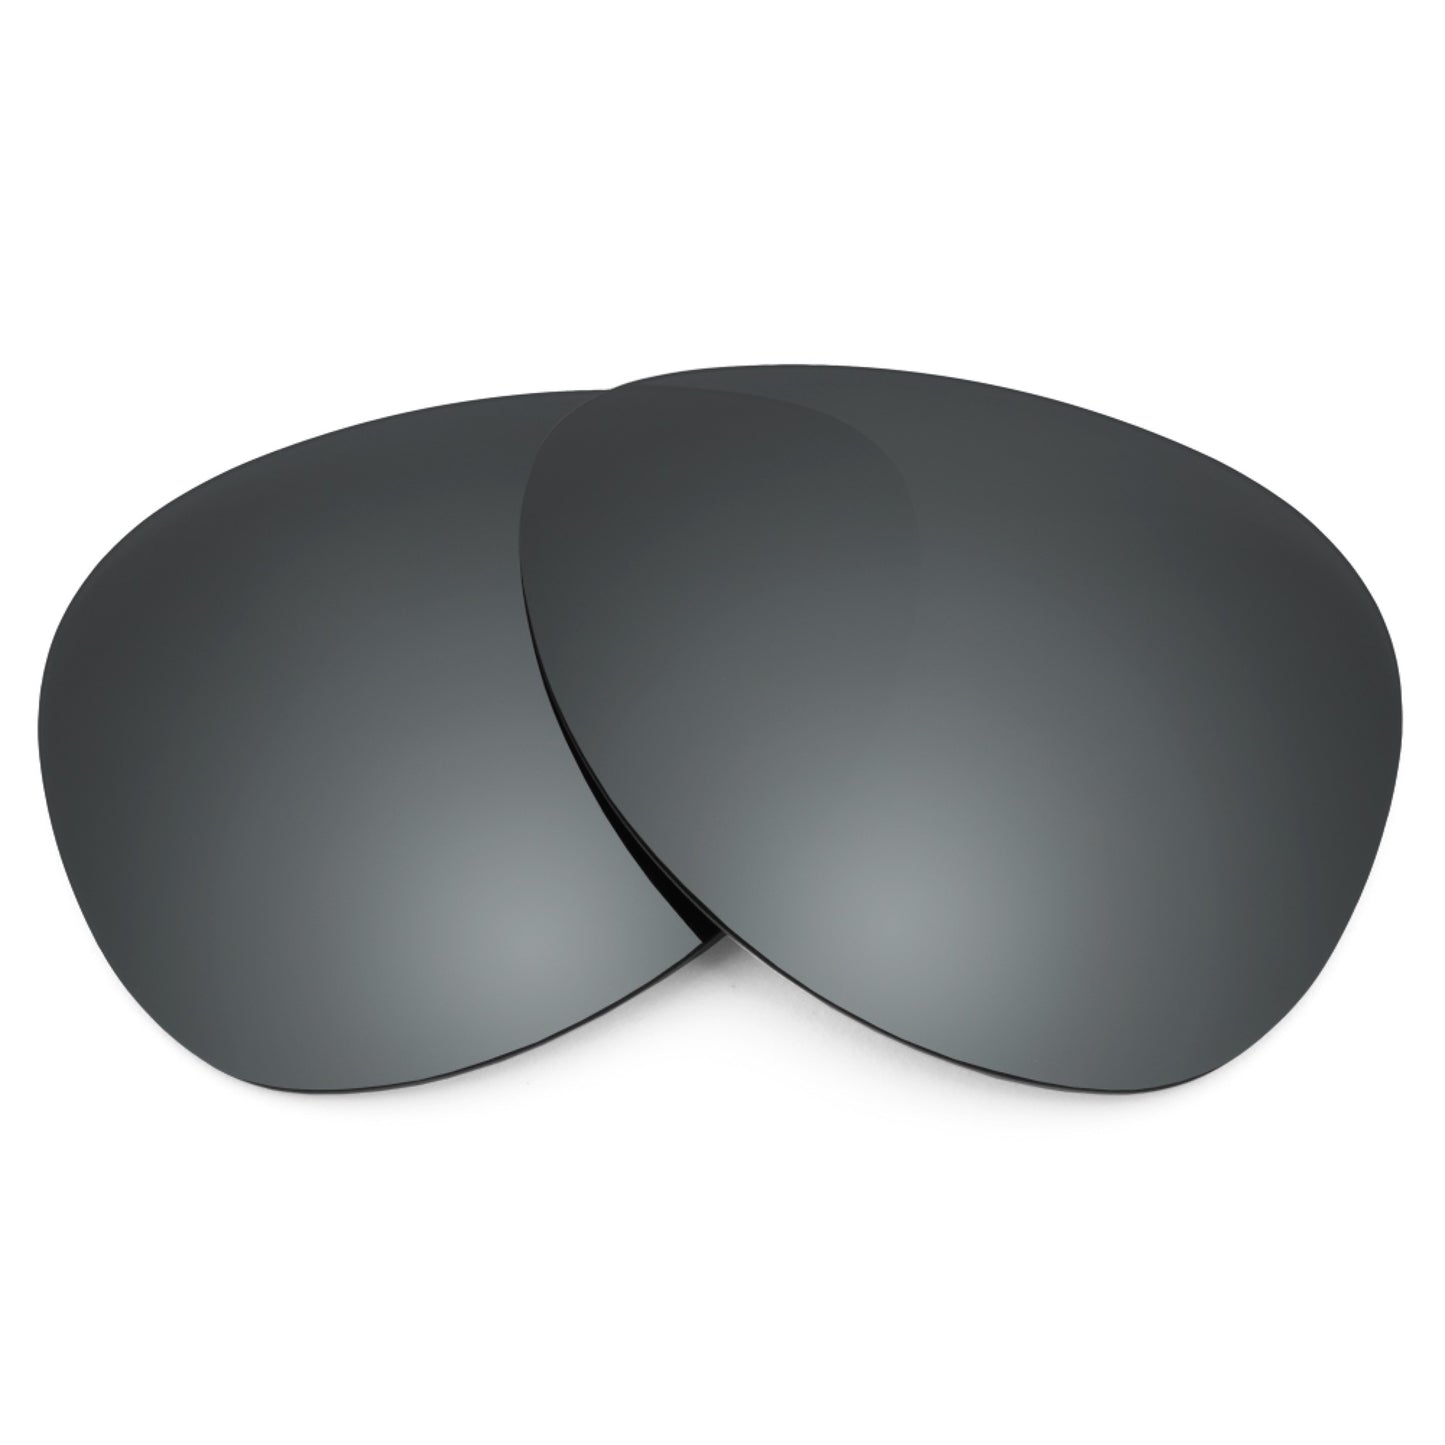 Revant replacement lenses for Ray-Ban Gatsby II RB4257 50mm Non-Polarized Black Chrome